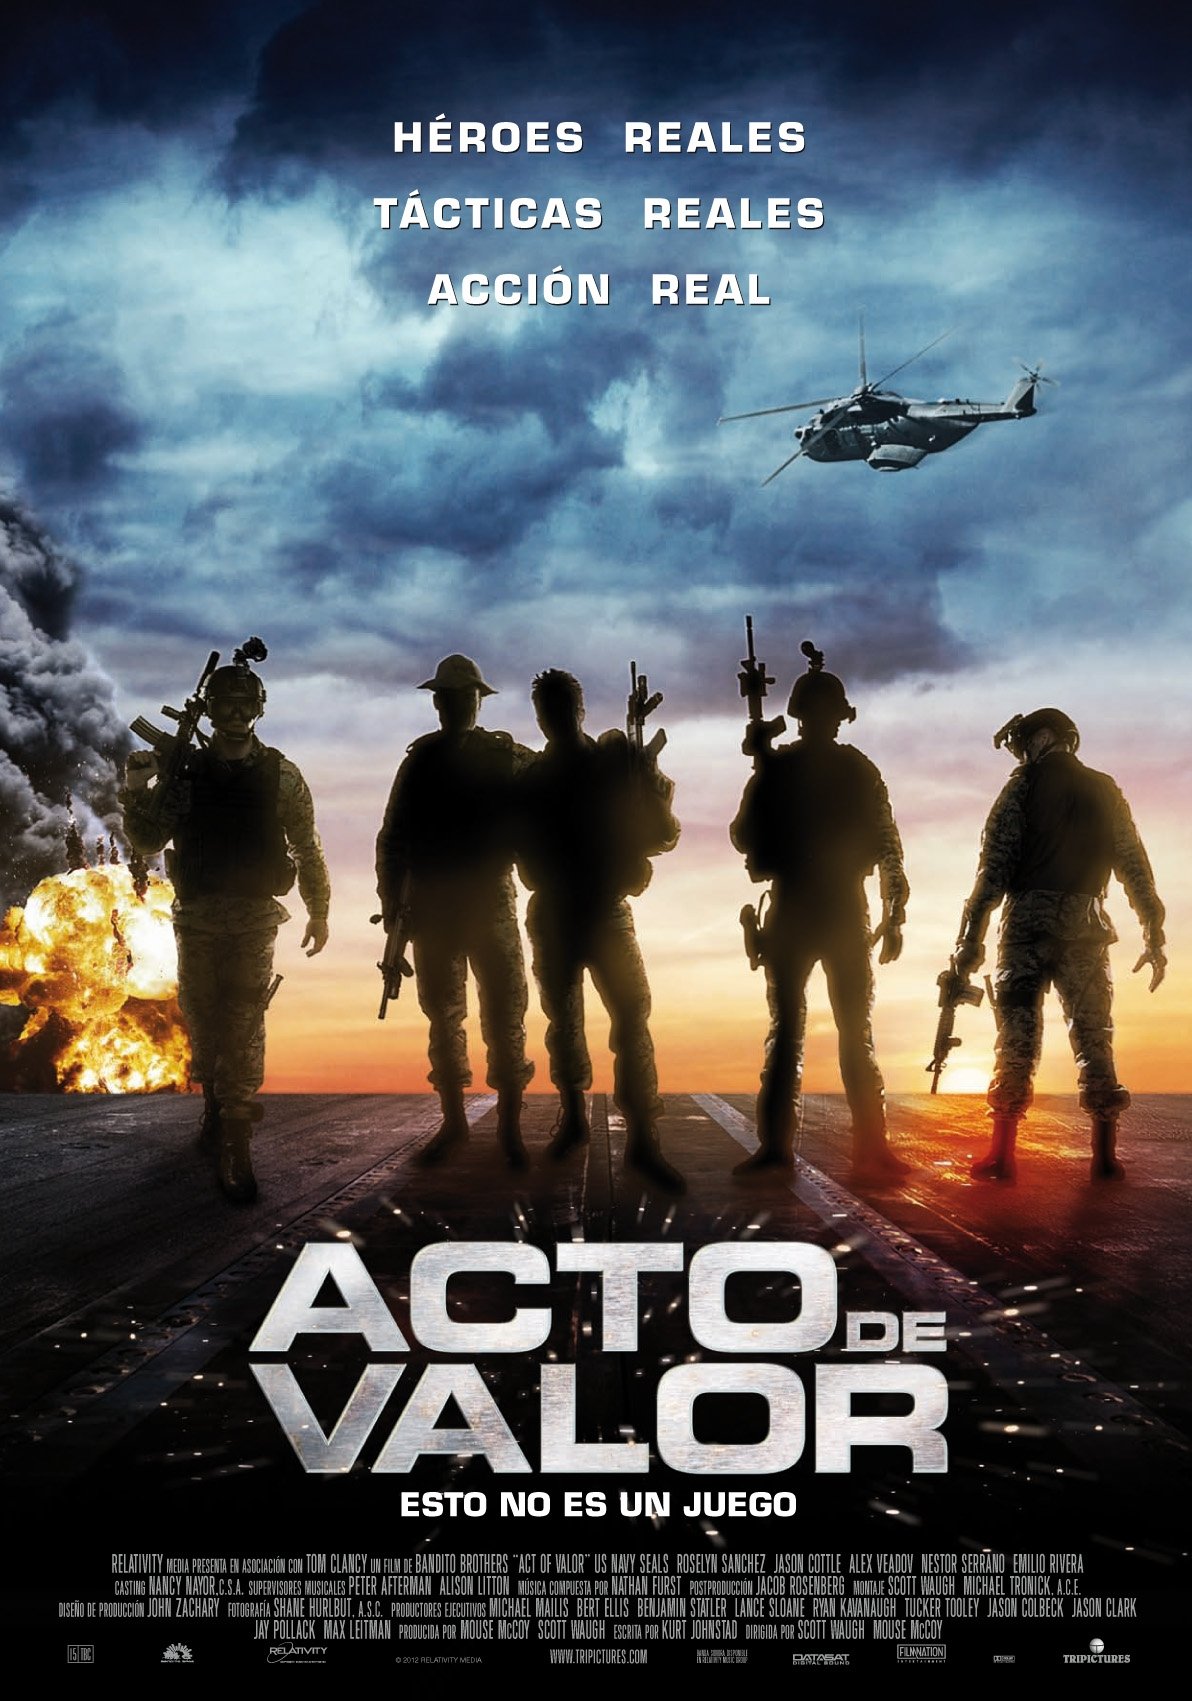 Act Of Valor Backgrounds on Wallpapers Vista